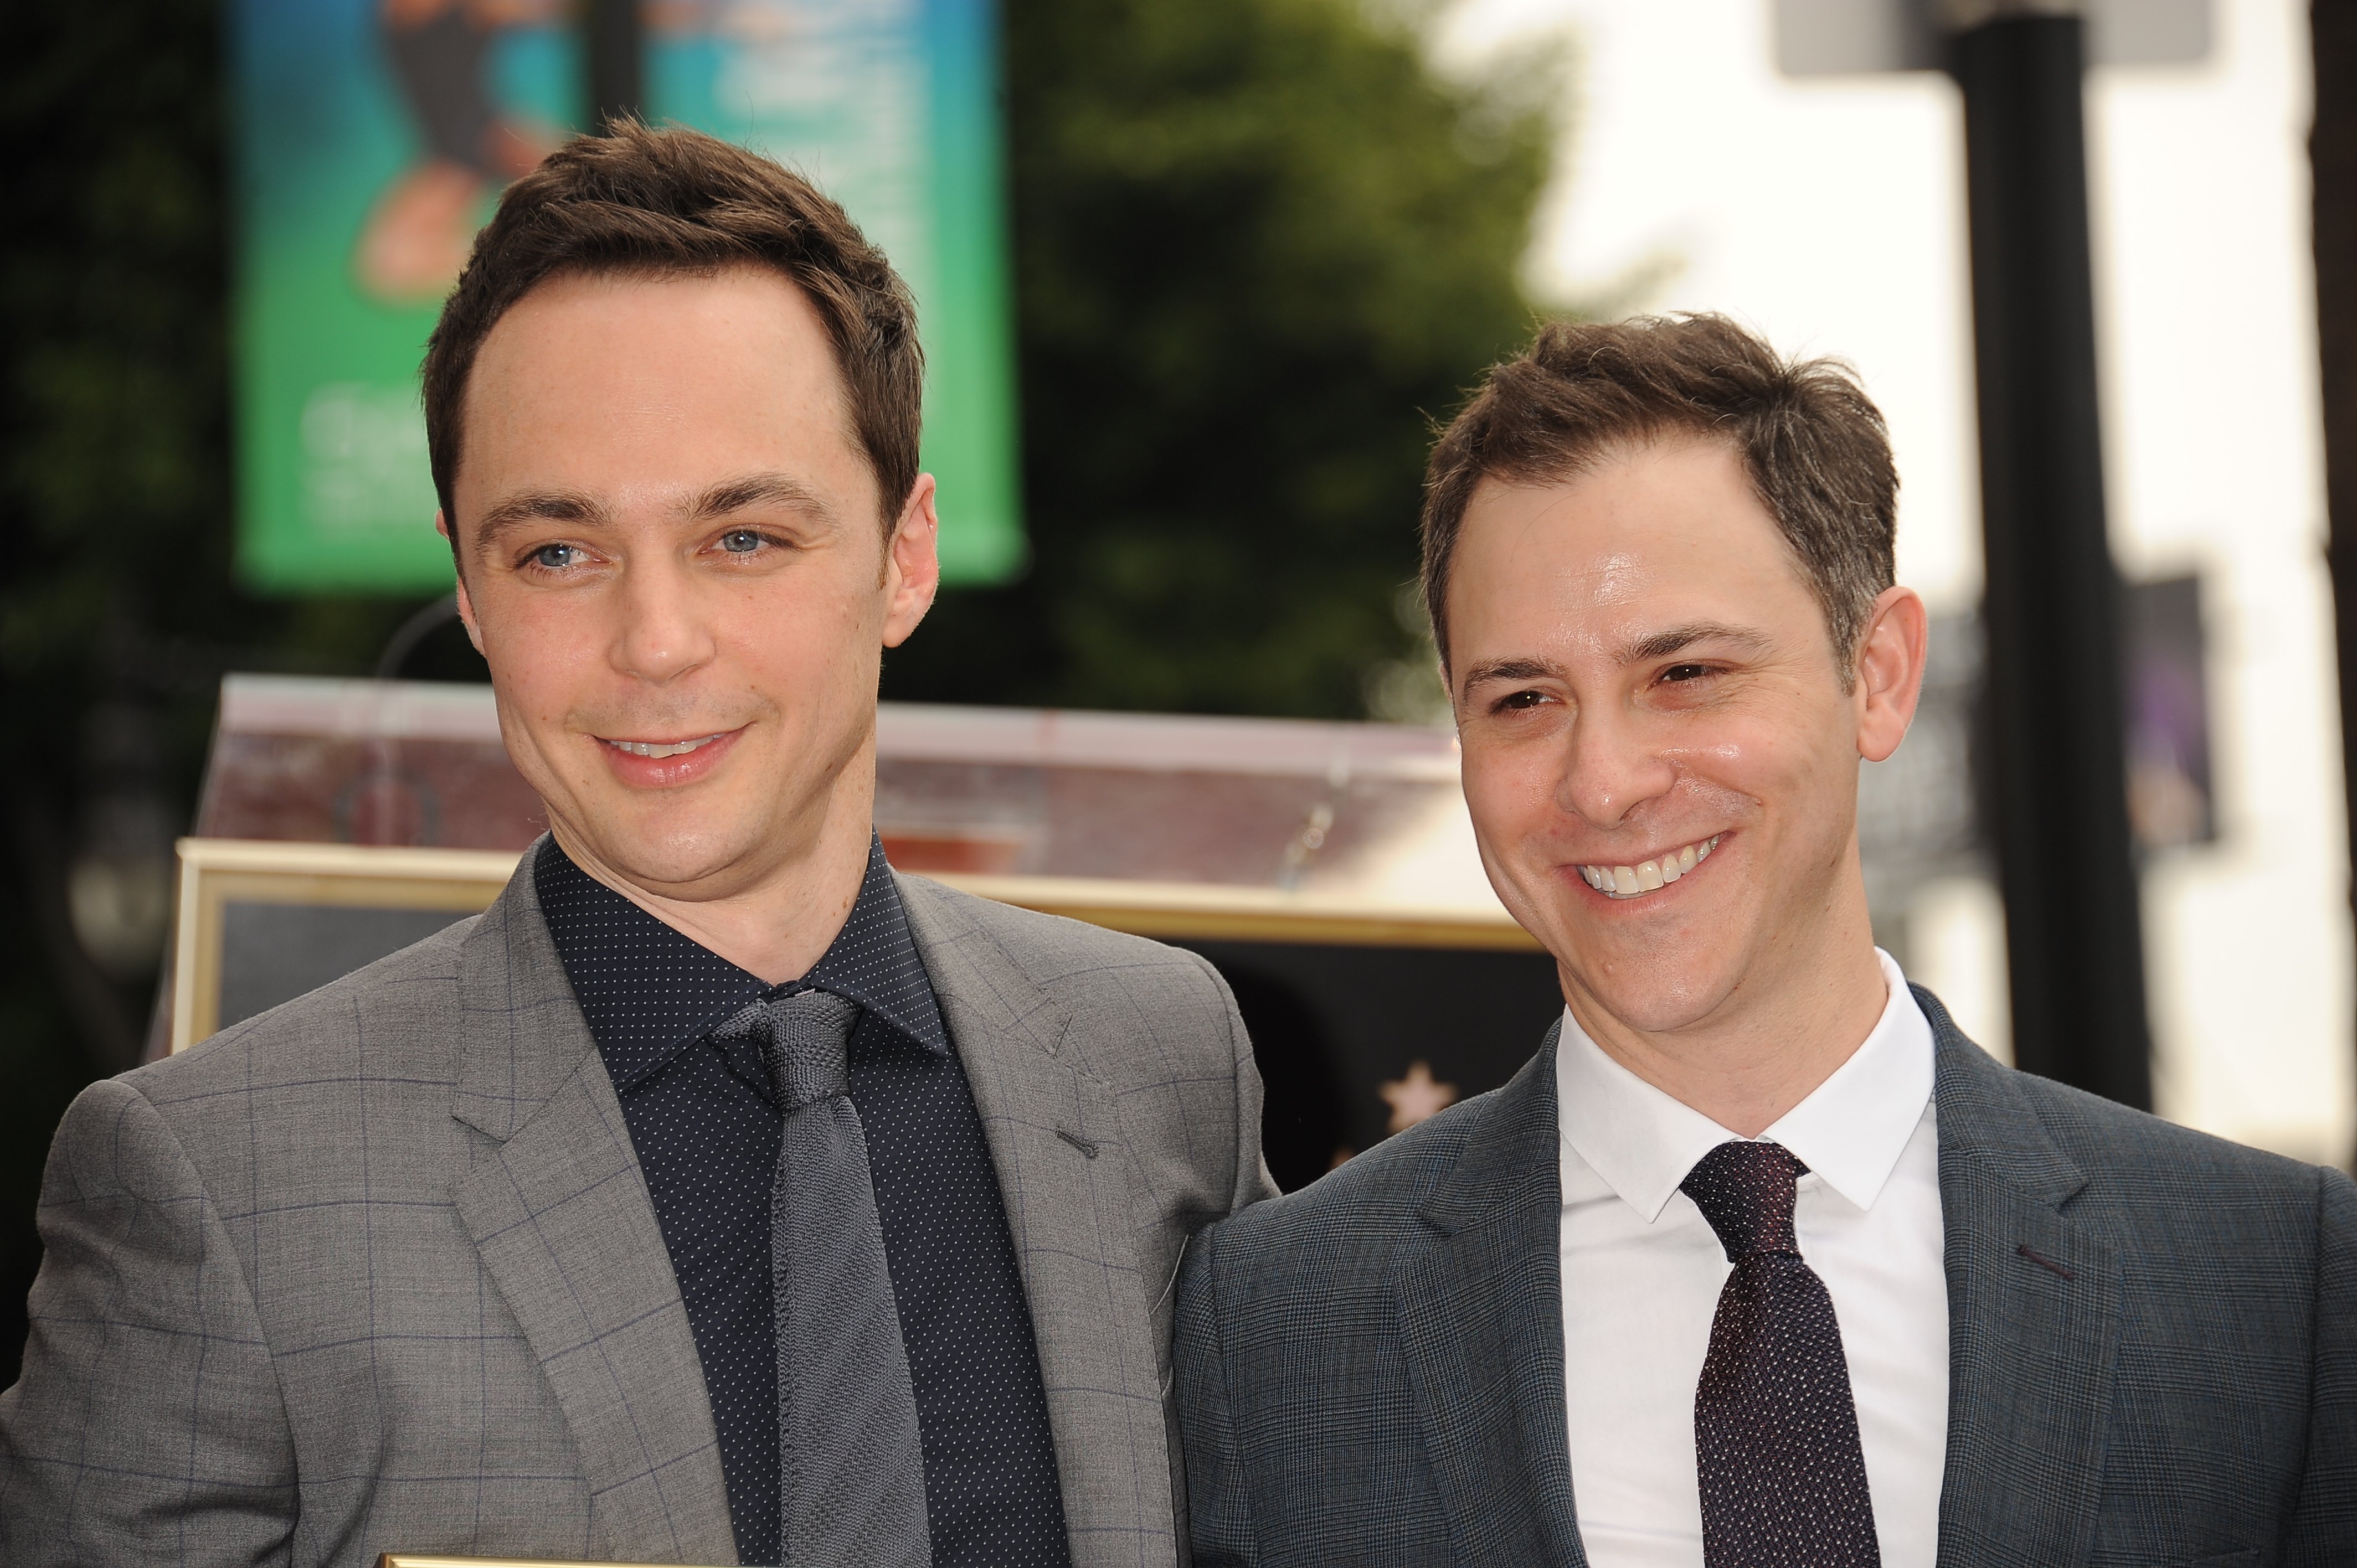 Actor Jim Parsons and Todd Spiewak pose at the ceremony that honored him with a Star on the Hollywood Walk of Fame. | Source: Getty Images